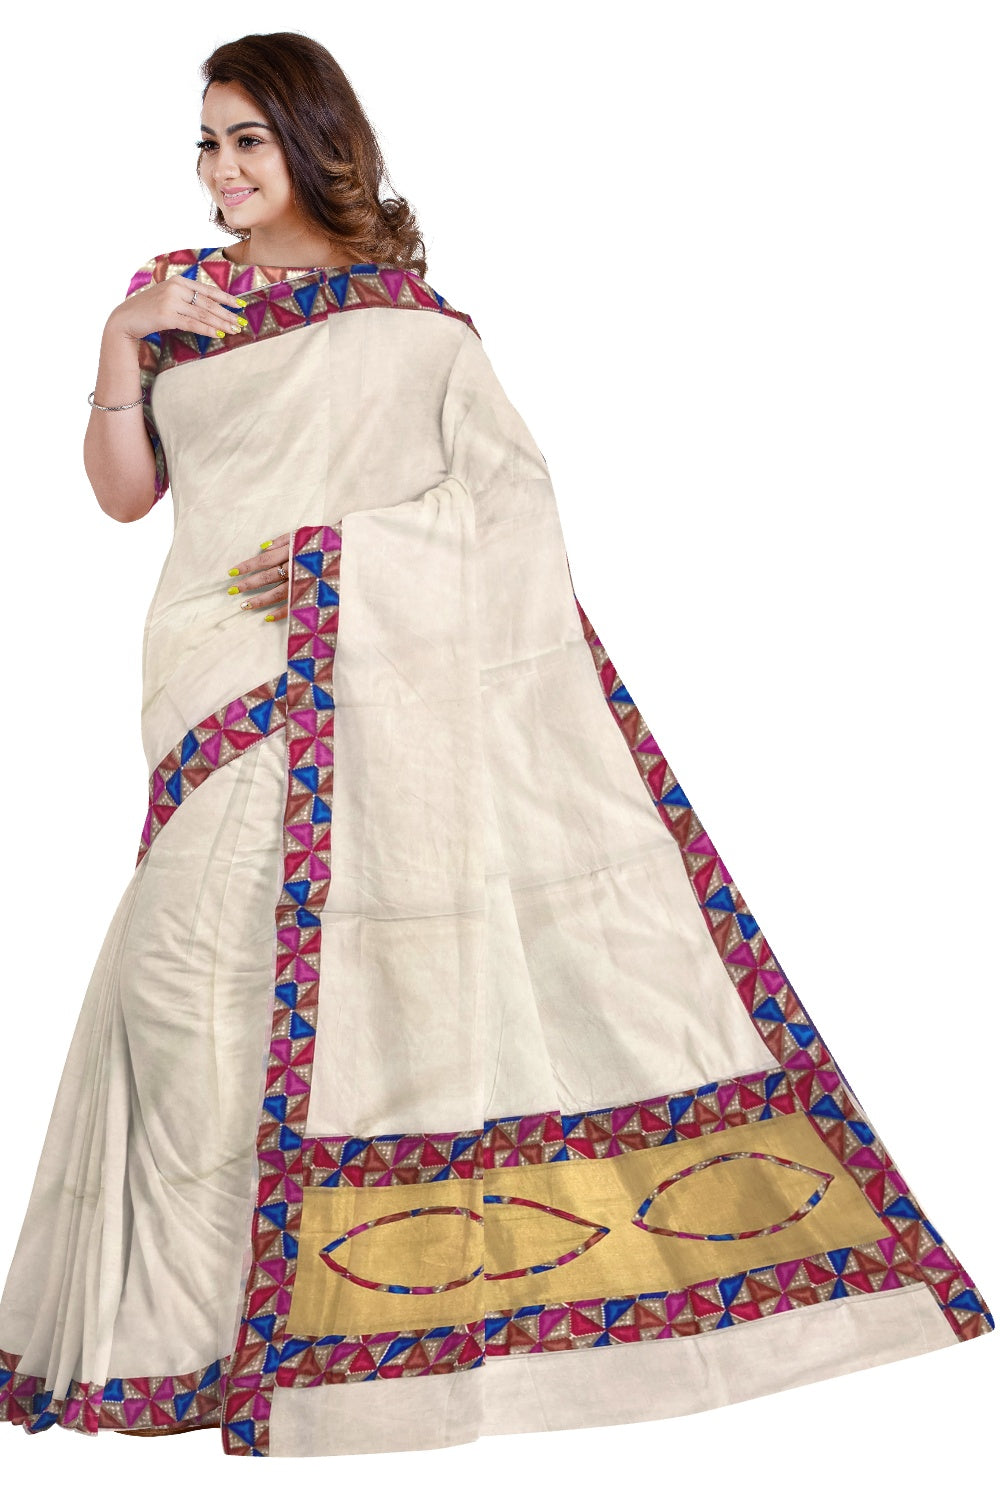 Southloom Kerala Pure Cotton Fusion Art Border Saree with Red Pink Blue Border